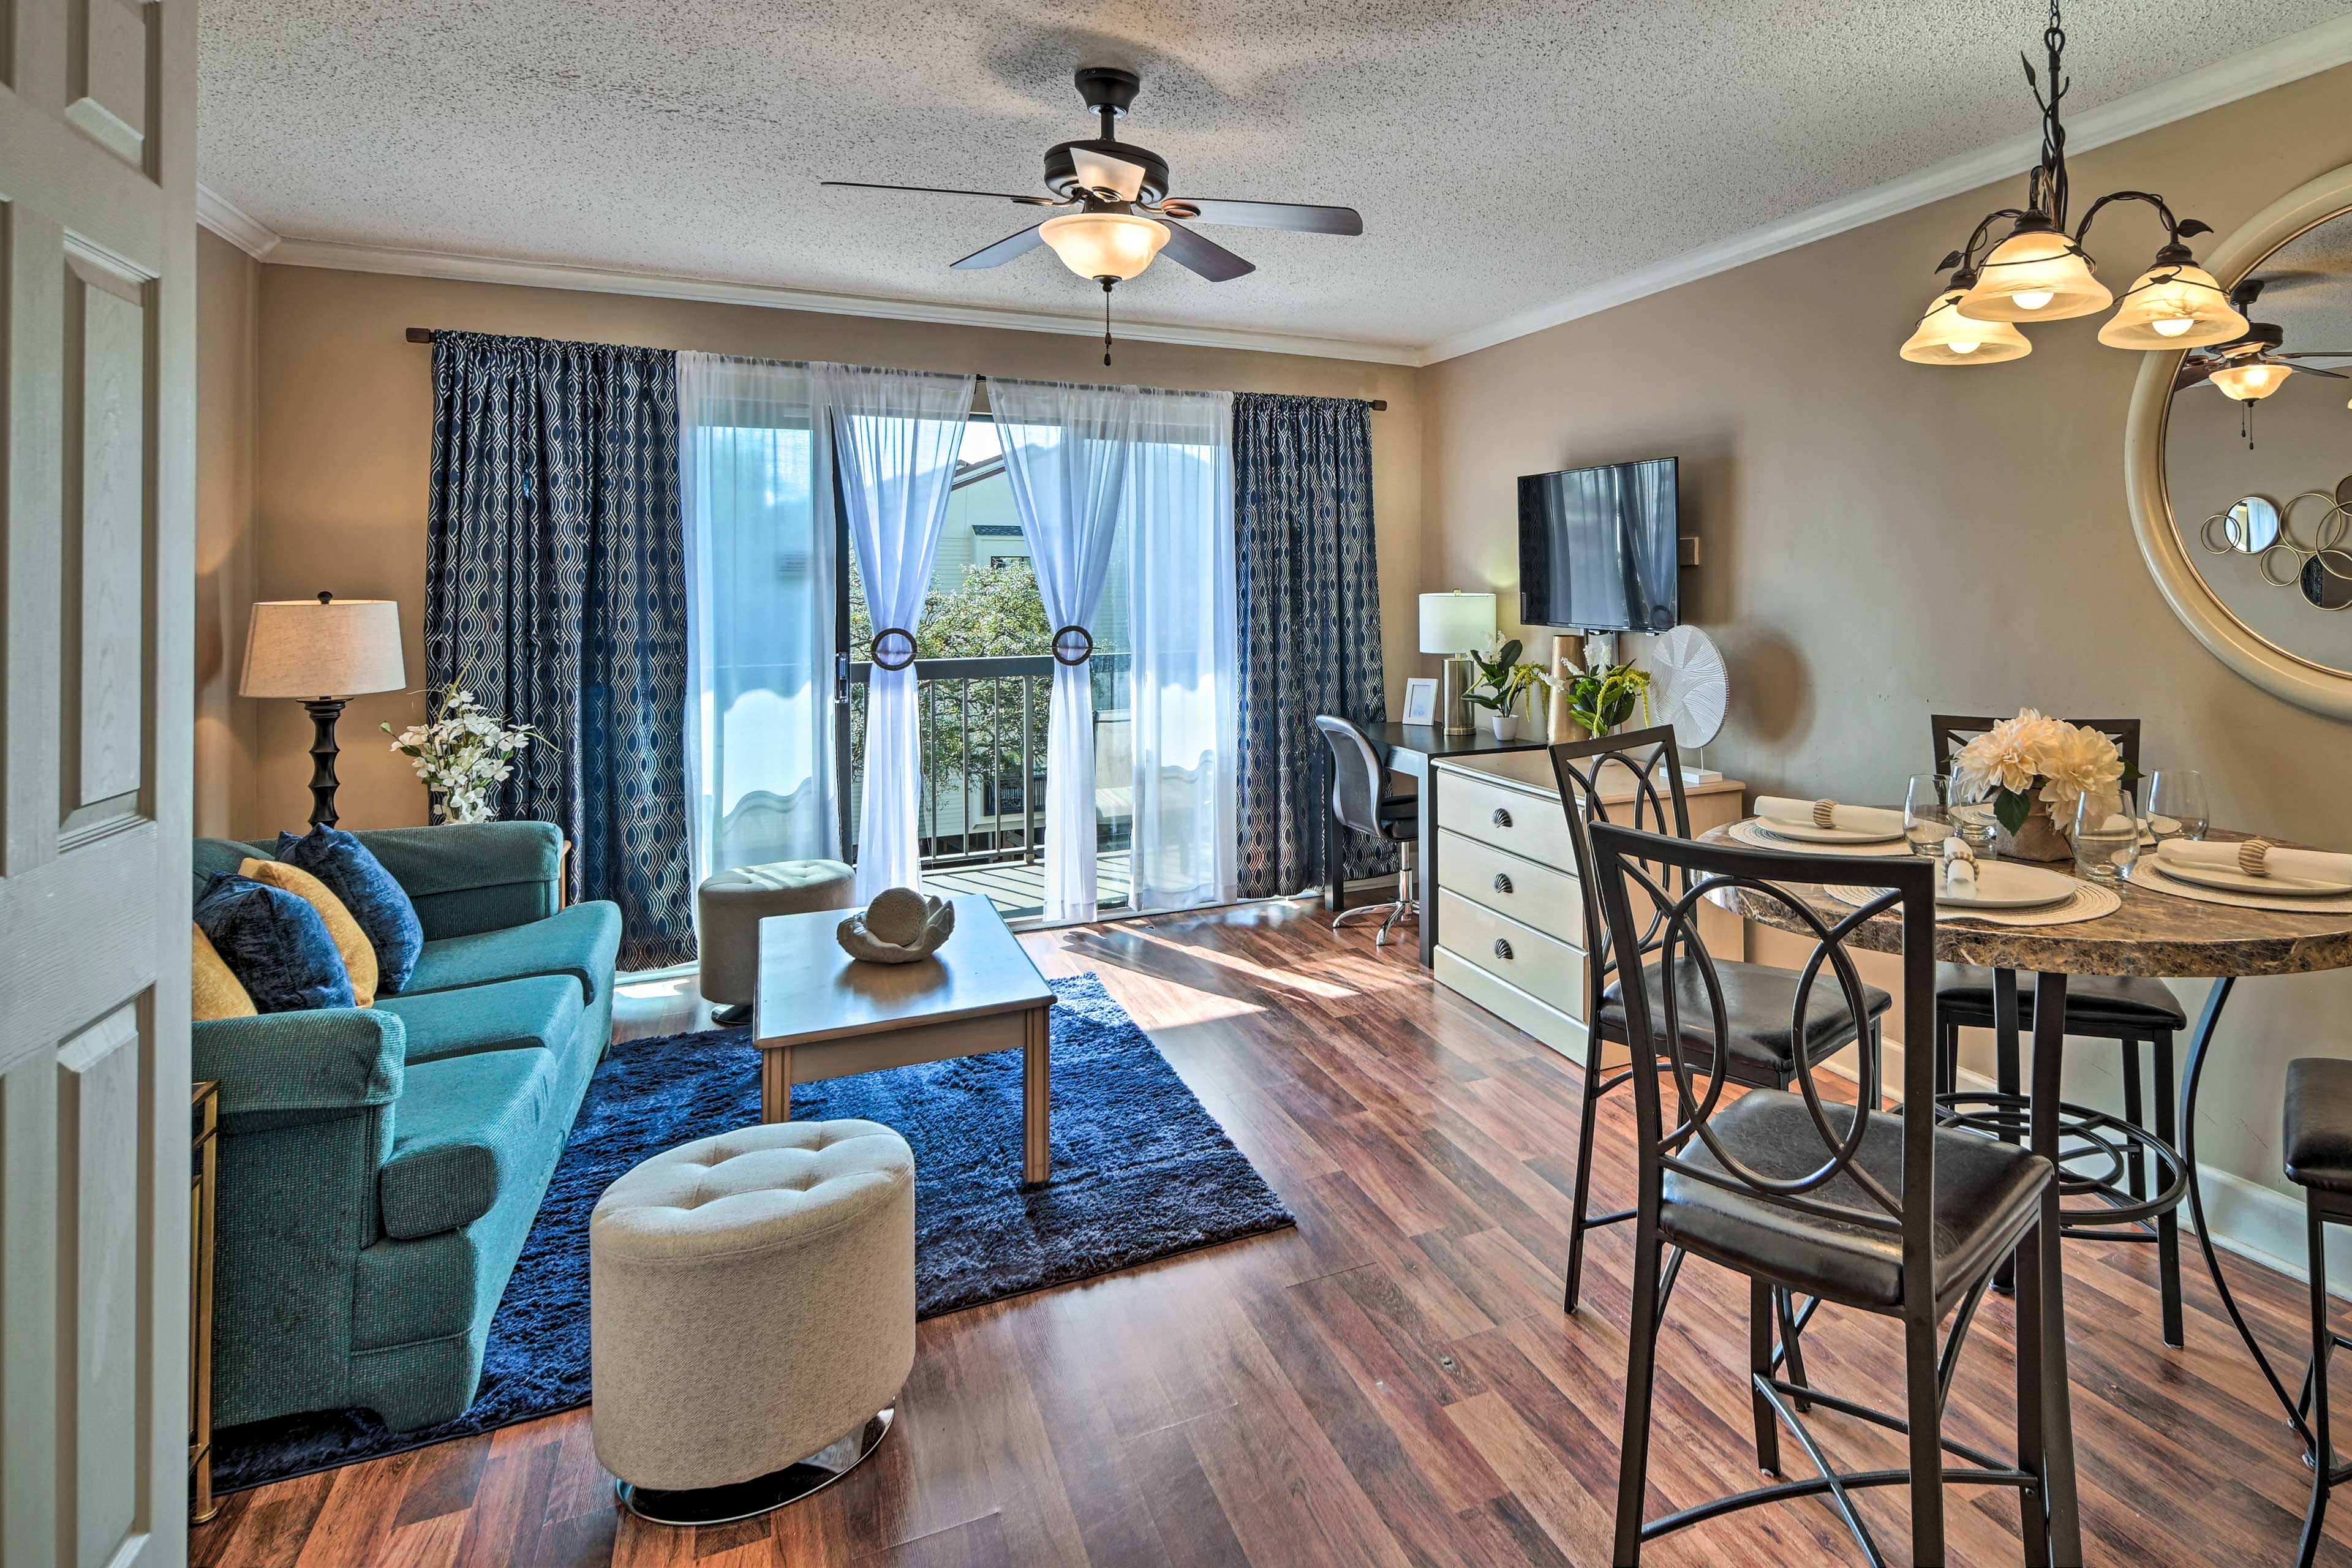 Myrtle Beach Vacation Rental | 1BR | 1.5BA | 559 Sq Ft | Step-Free Access